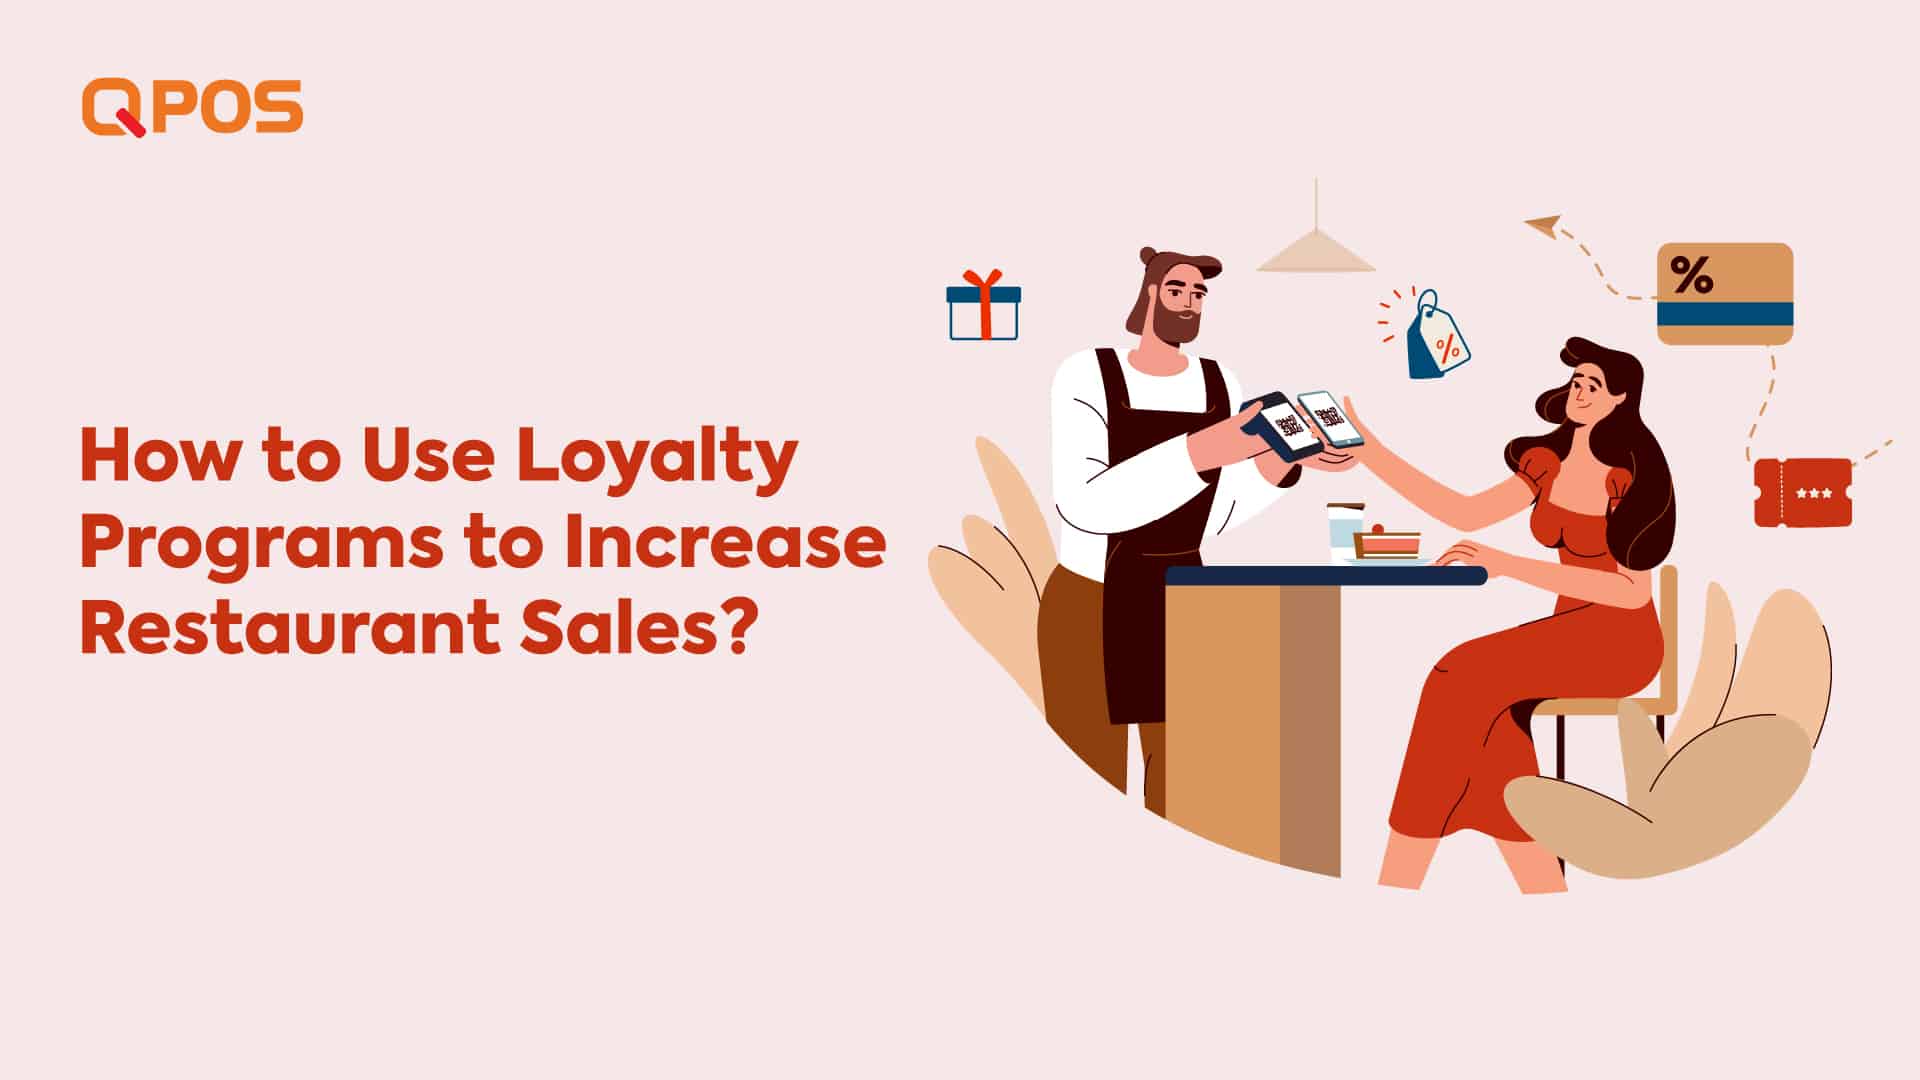 How to Use Loyalty Programs to Increase Restaurant Sales